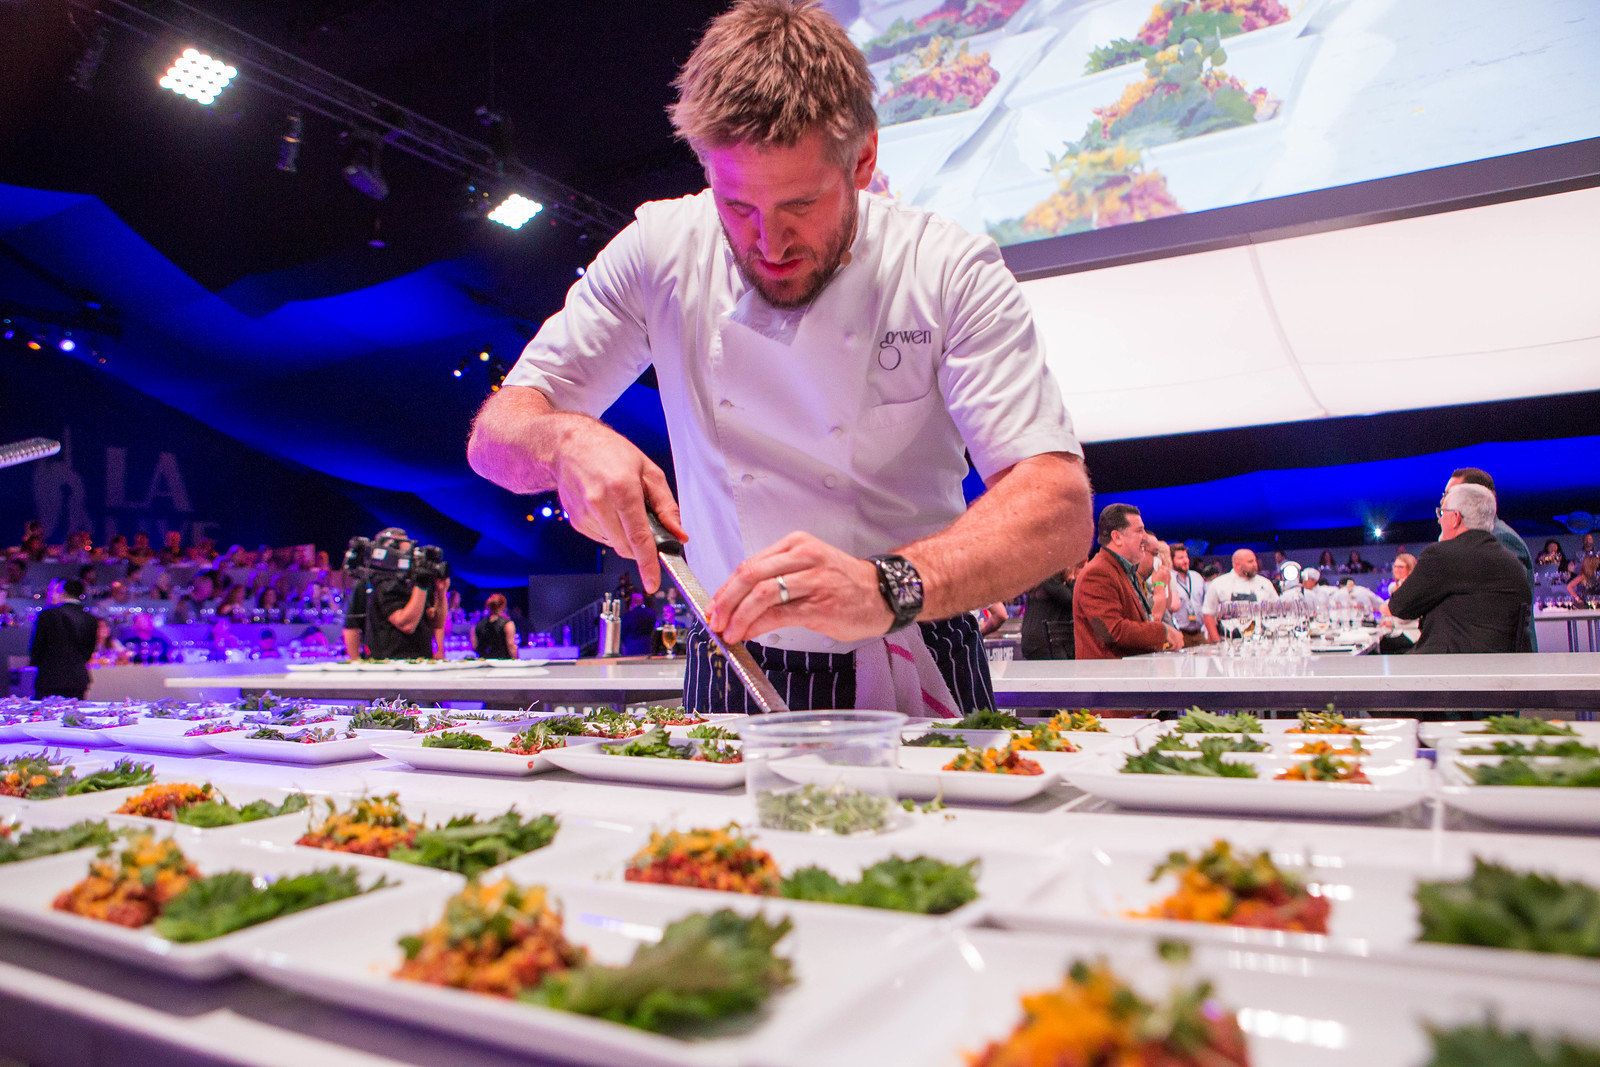 Chef plating food during All Star Chef Classic Event